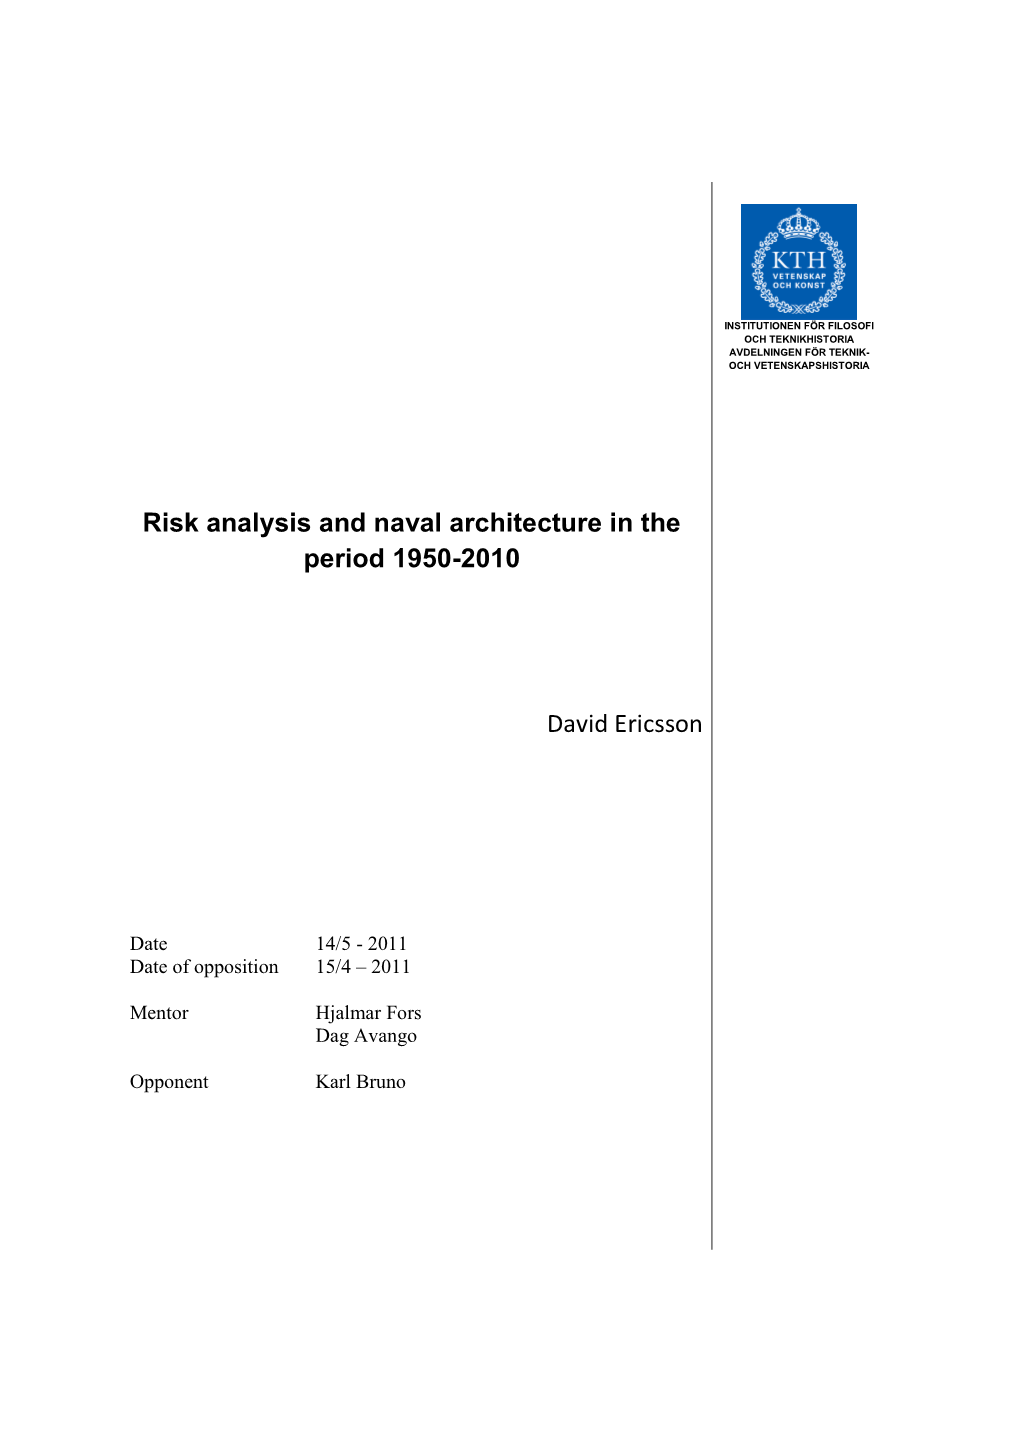 Risk Analysis and Naval Architecture in the Period 1950-2010 David